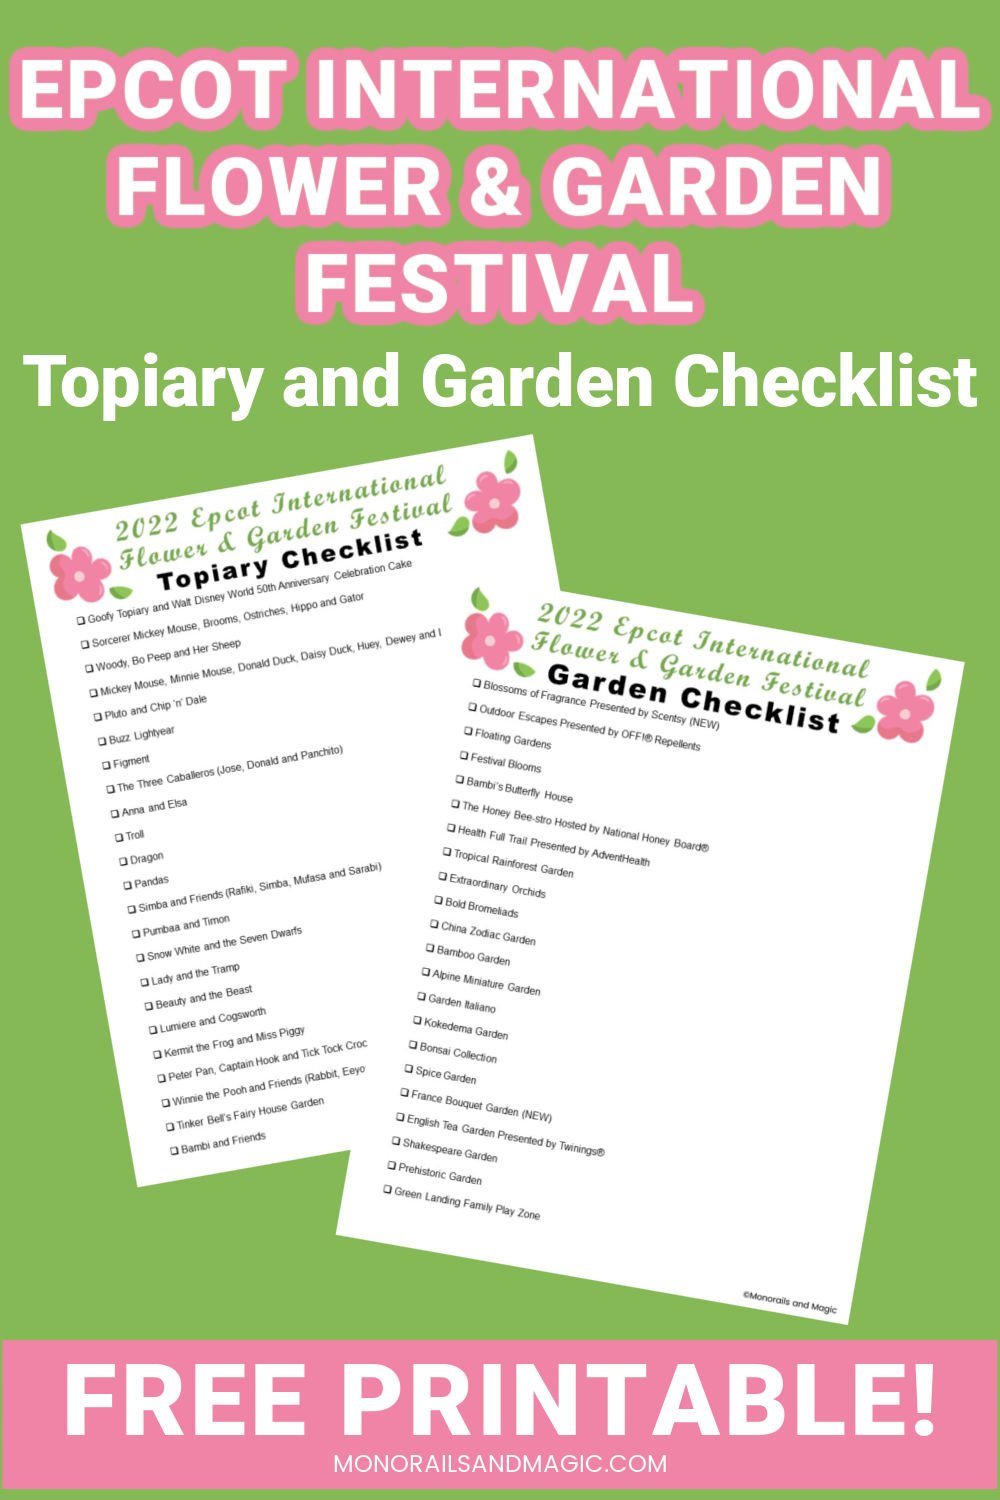 Free printable topiary and garden checklist for the Epcot International Flower and Garden Festival.